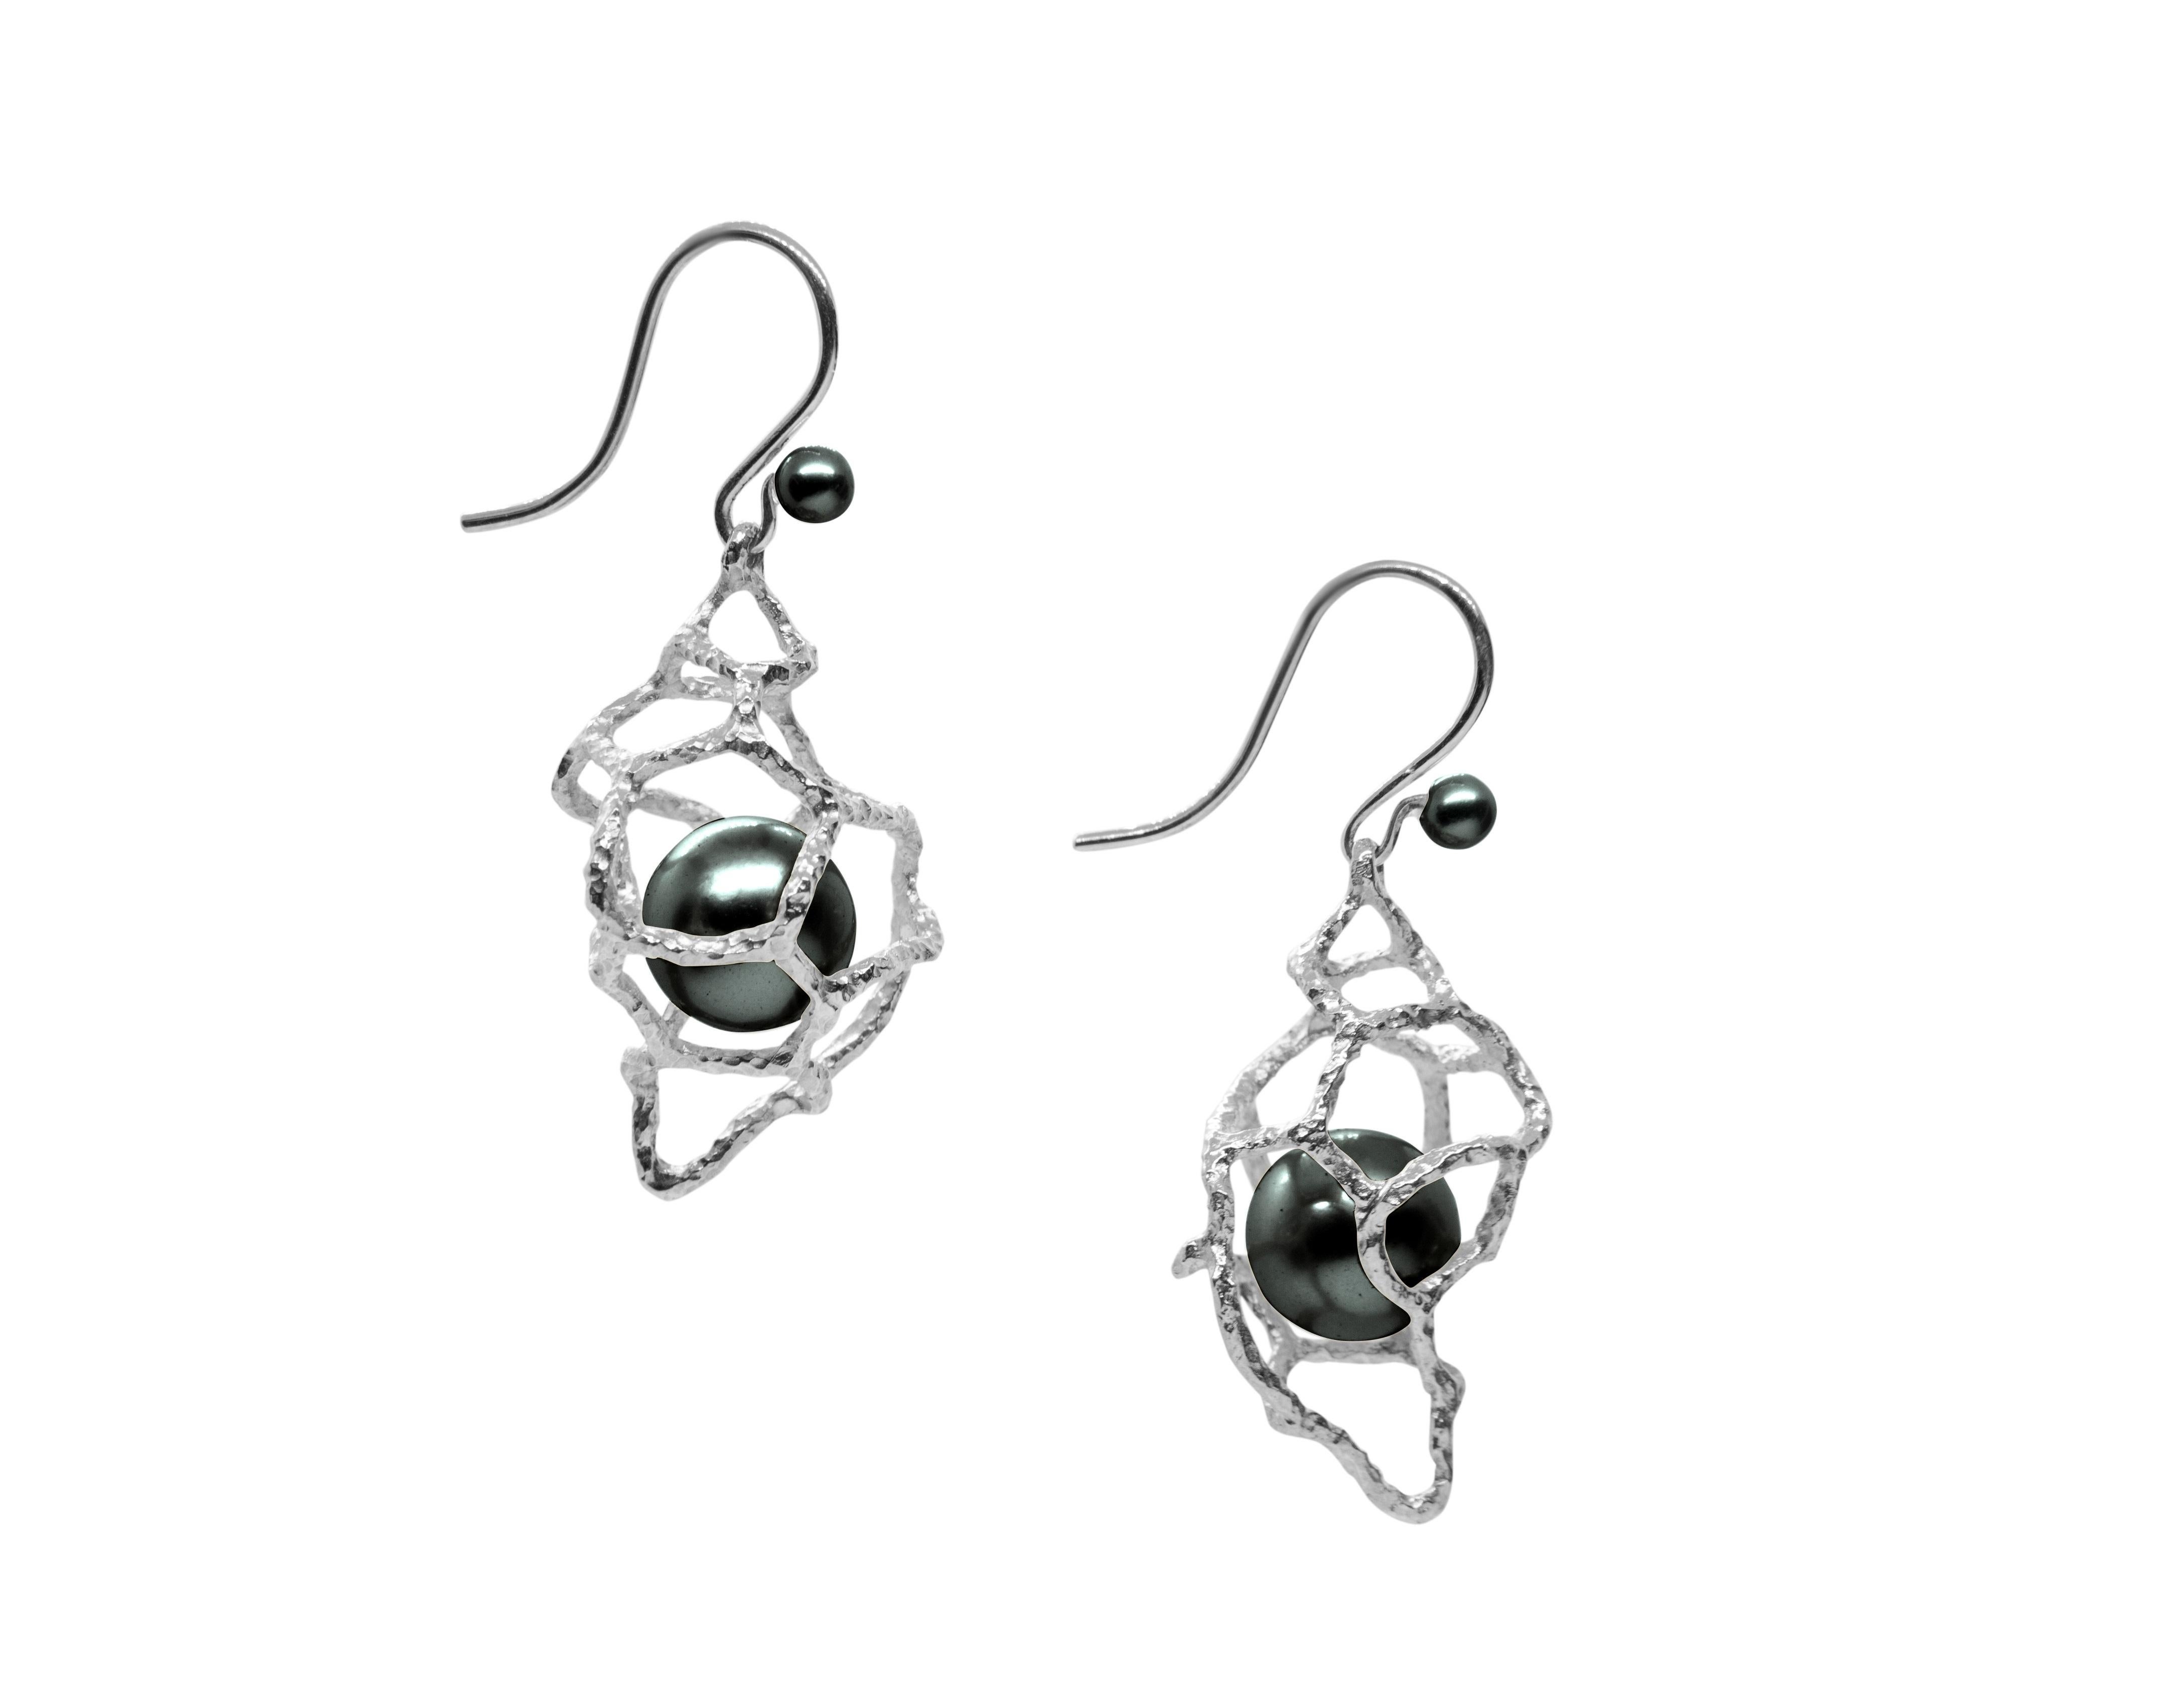 This pair of earrings are from Lingjun's 'FISSURE' collection, inspired by the conch shell in the sea, embracing the fine round black Tahitian pearls, celebrating the vibrant life of our oceans.

The organic lines of gold were hand carved to mimic